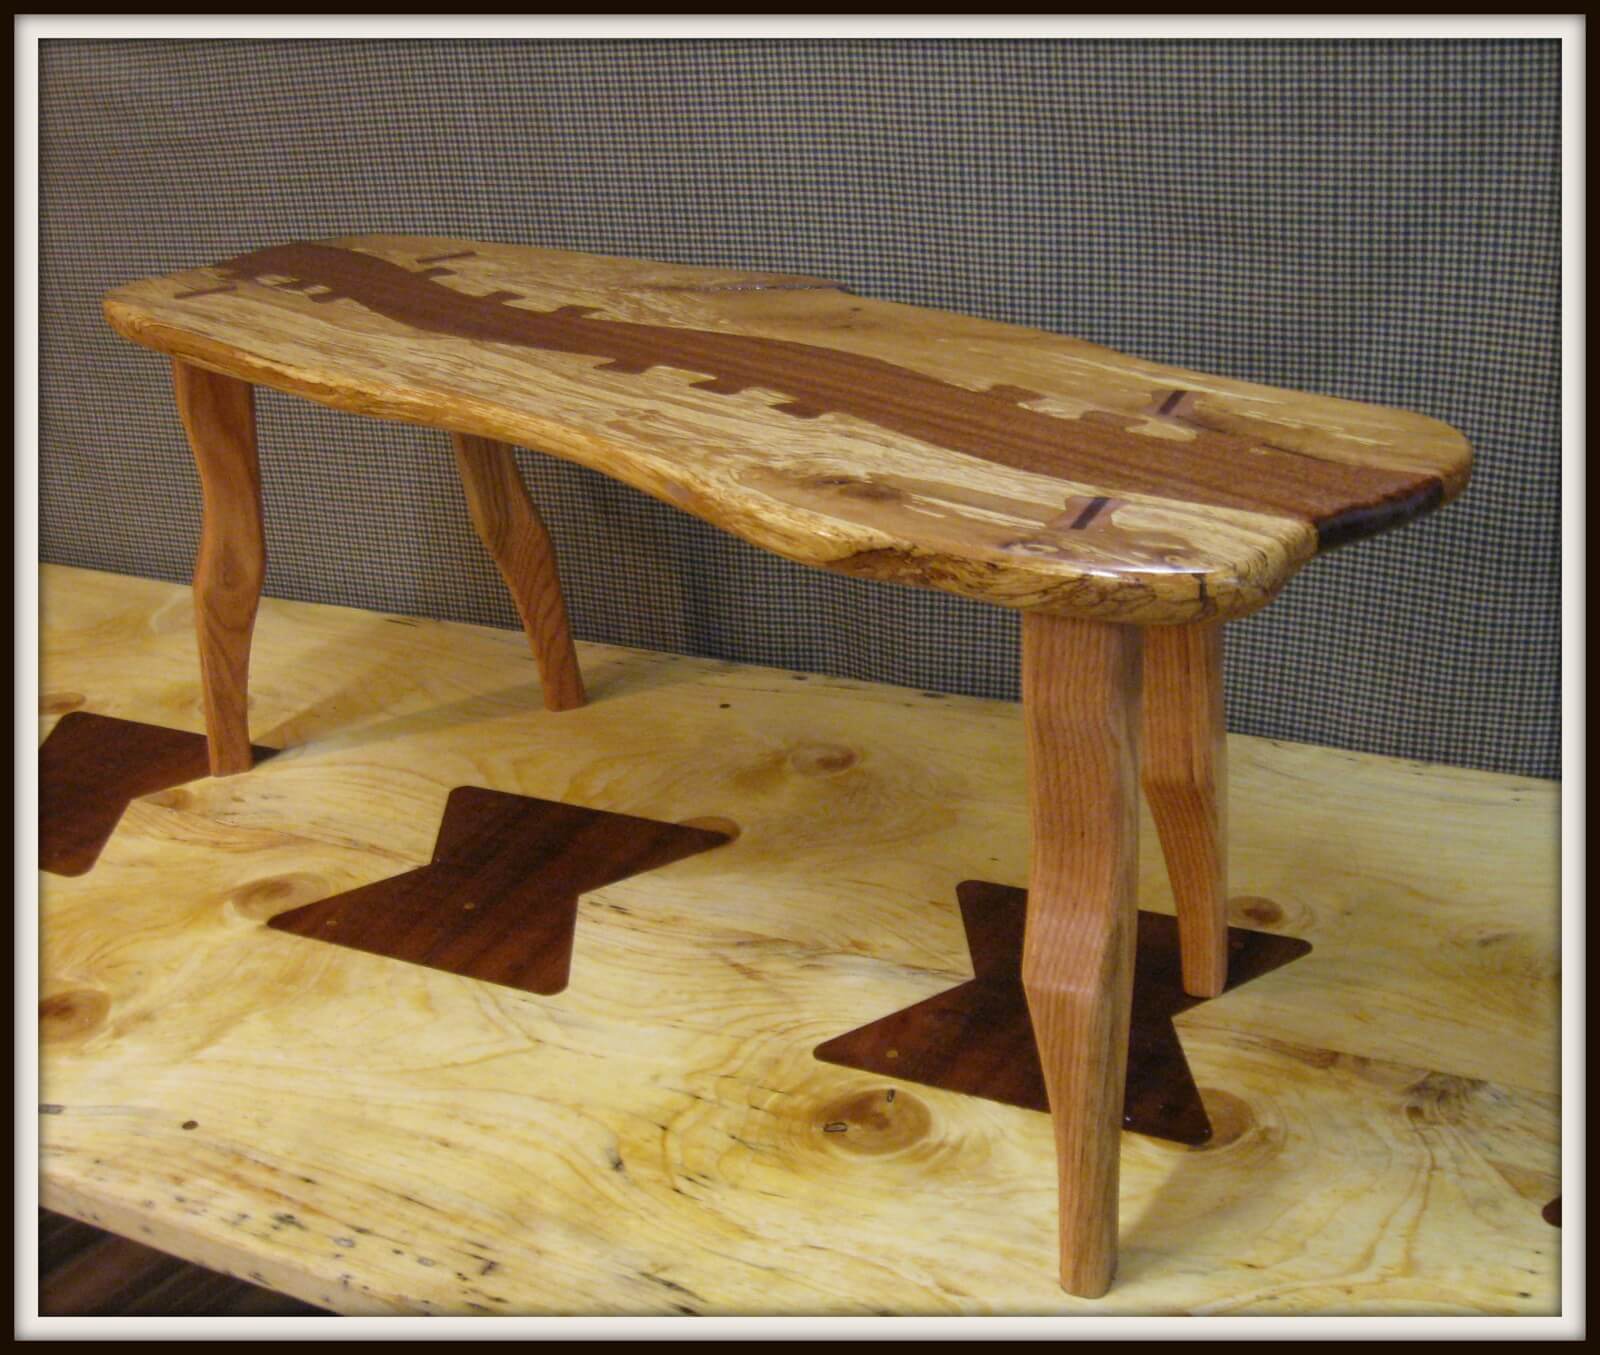 Harnett Designs Woodworking: Maple Live Edge Table, handcrafted furniture